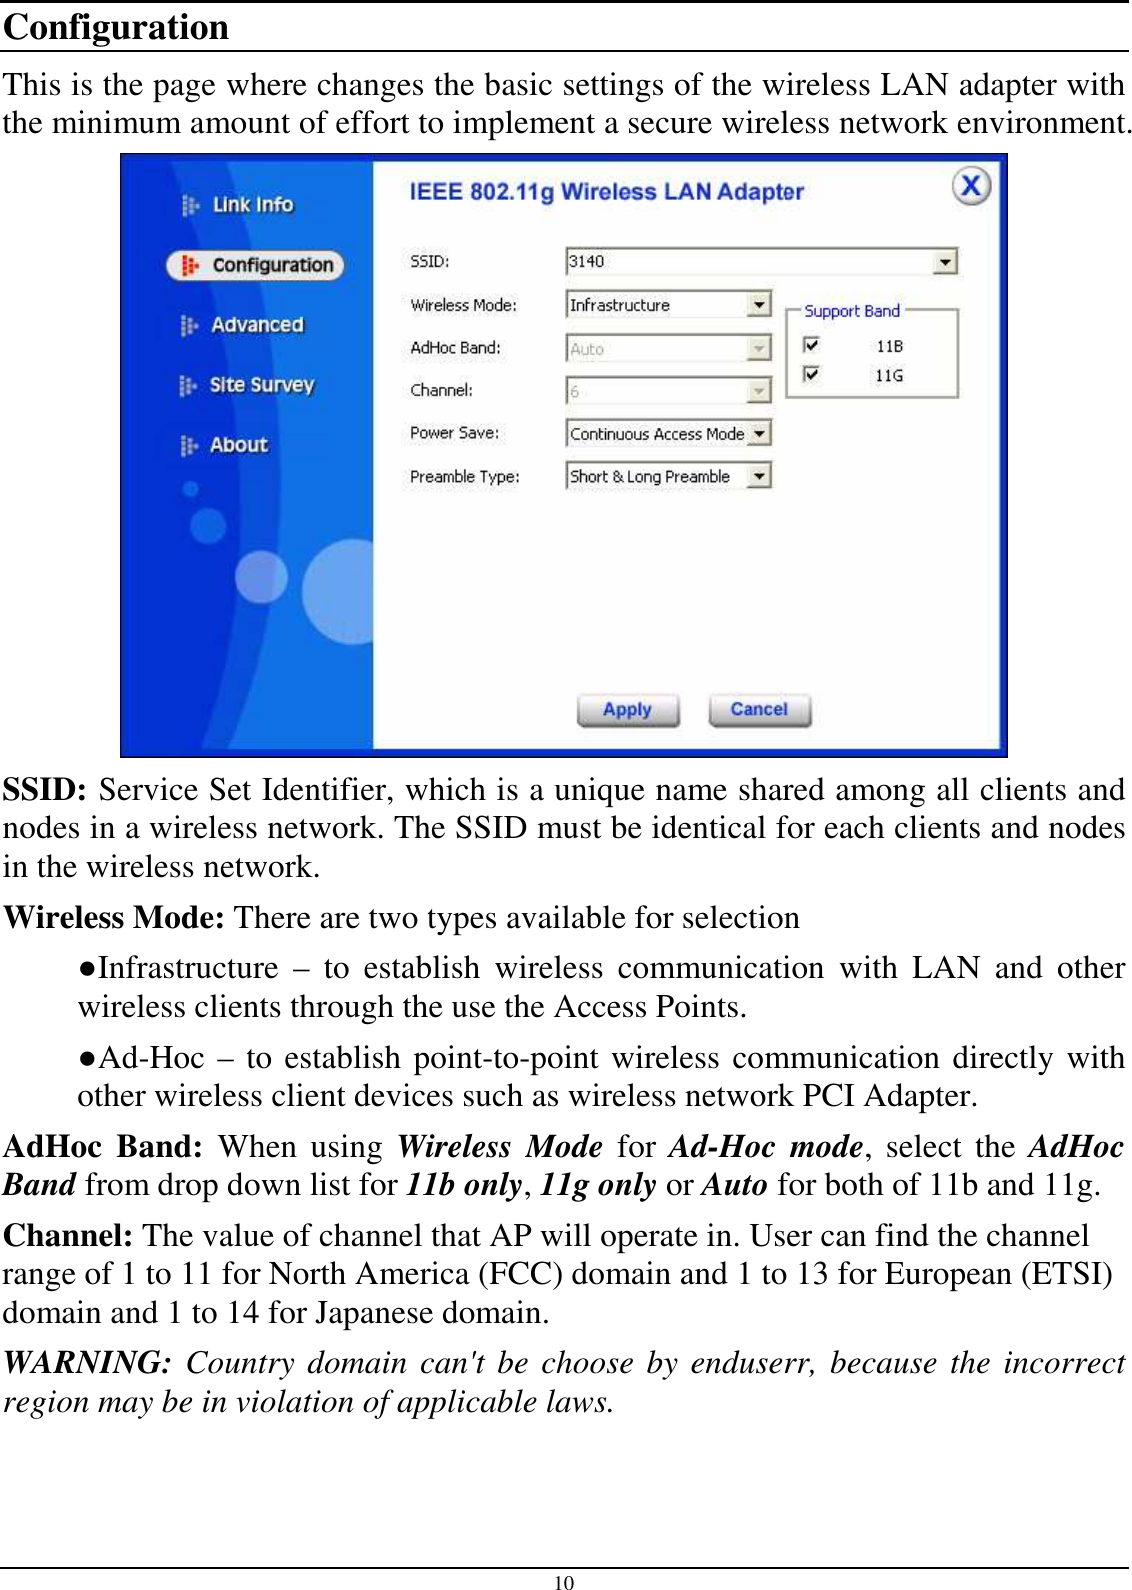 10 Configuration This is the page where changes the basic settings of the wireless LAN adapter with the minimum amount of effort to implement a secure wireless network environment.  SSID: Service Set Identifier, which is a unique name shared among all clients and nodes in a wireless network. The SSID must be identical for each clients and nodes in the wireless network. Wireless Mode: There are two types available for selection ●Infrastructure  –  to  establish  wireless  communication  with  LAN  and  other wireless clients through the use the Access Points. ●Ad-Hoc – to establish point-to-point wireless communication directly with other wireless client devices such as wireless network PCI Adapter. AdHoc  Band:  When  using  Wireless  Mode for Ad-Hoc  mode, select  the  AdHoc Band from drop down list for 11b only, 11g only or Auto for both of 11b and 11g. Channel: The value of channel that AP will operate in. User can find the channel range of 1 to 11 for North America (FCC) domain and 1 to 13 for European (ETSI) domain and 1 to 14 for Japanese domain.  WARNING: Country domain can&apos;t be choose by enduserr, because the incorrect region may be in violation of applicable laws.  